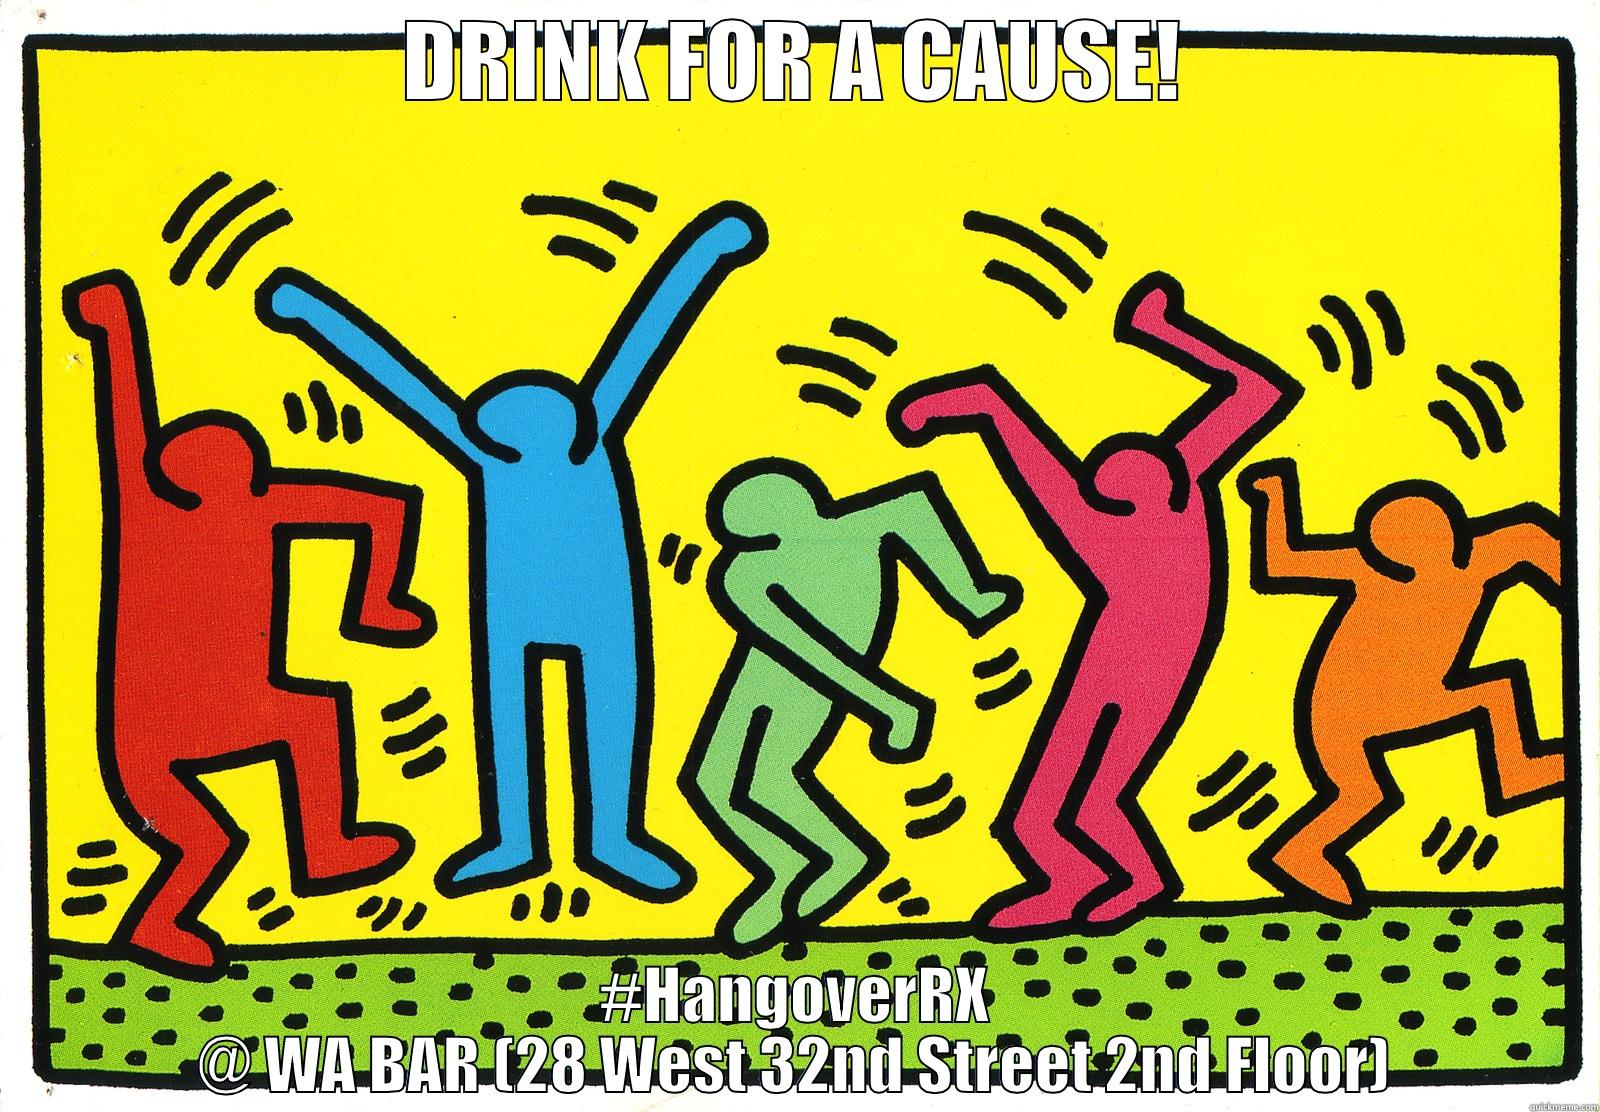 DRINK FOR A CAUSE! #HANGOVERRX @ WA BAR (28 WEST 32ND STREET 2ND FLOOR) Misc